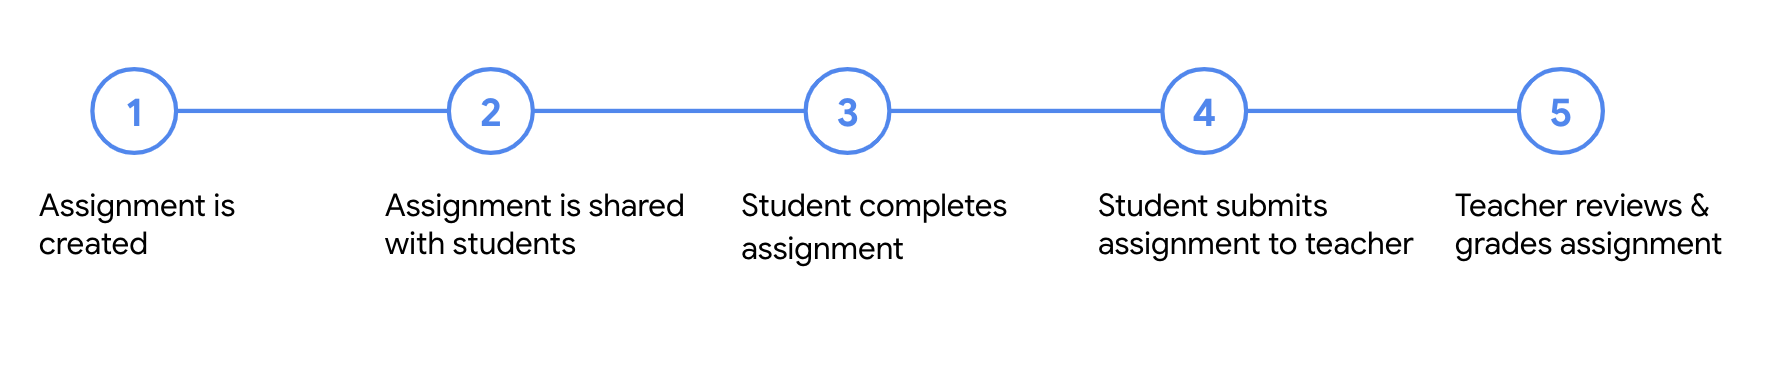 Diagram showing the five steps to an assignment